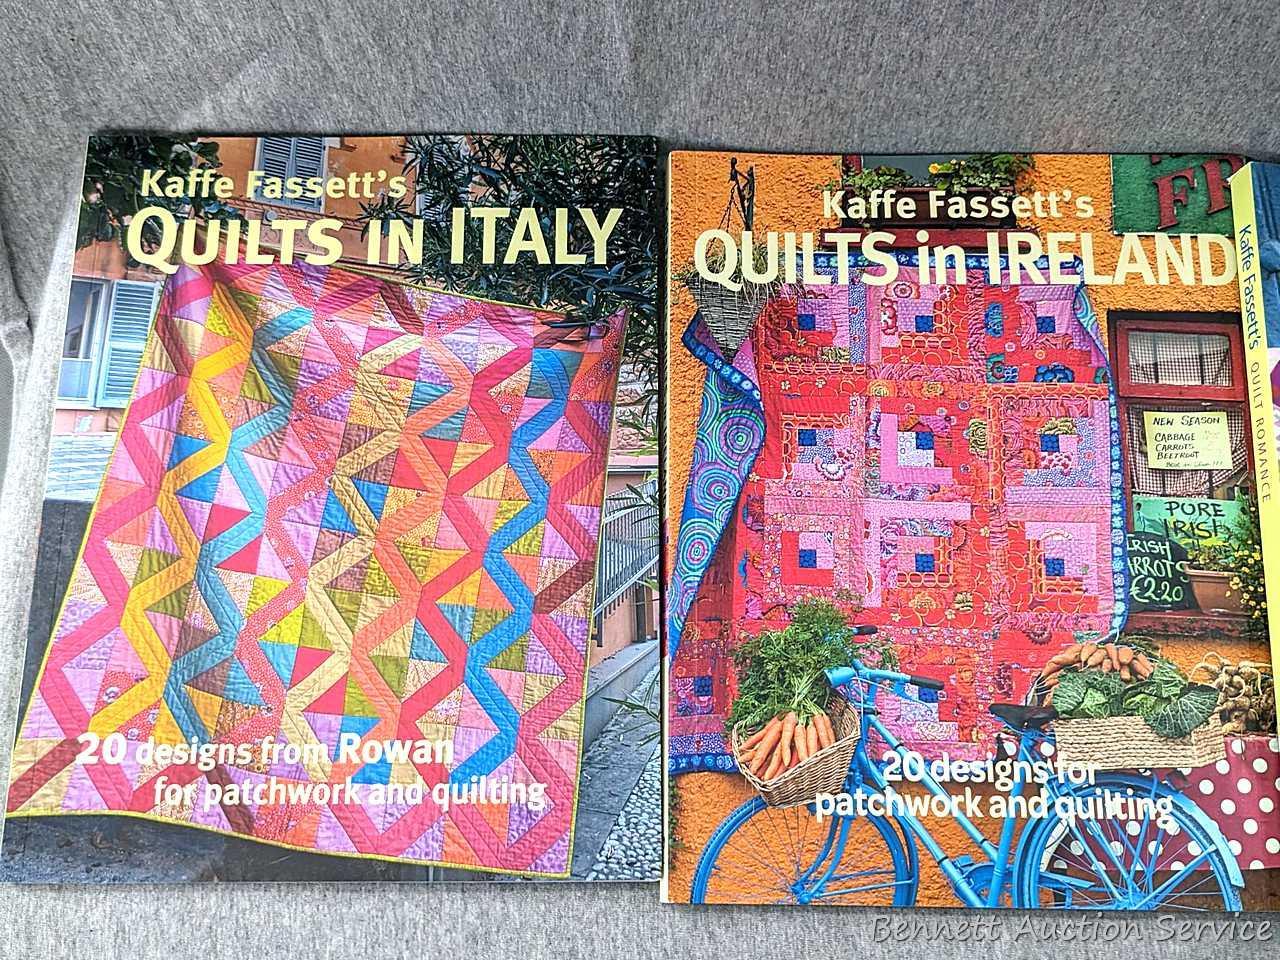 variety, Other, Quilting Books